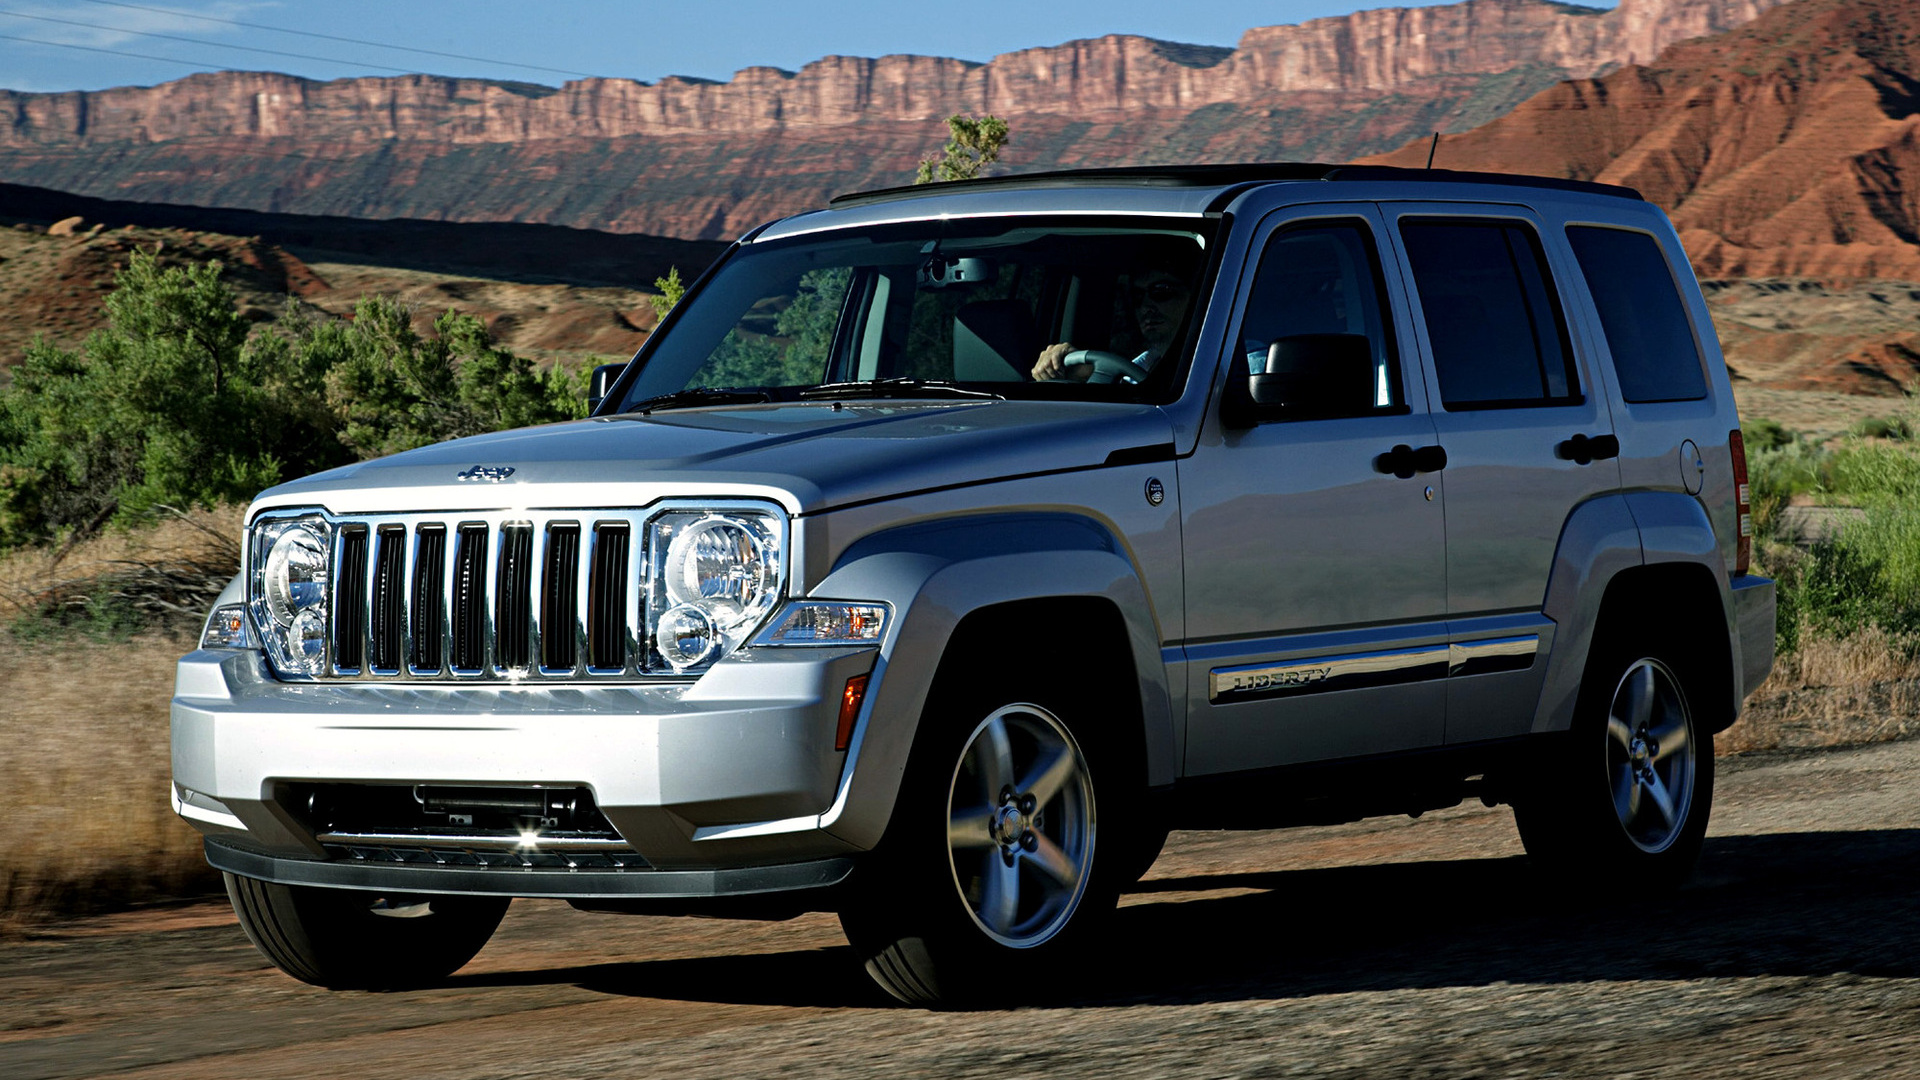 2007 Jeep Liberty Wallpapers And Hd Images Car Pixel